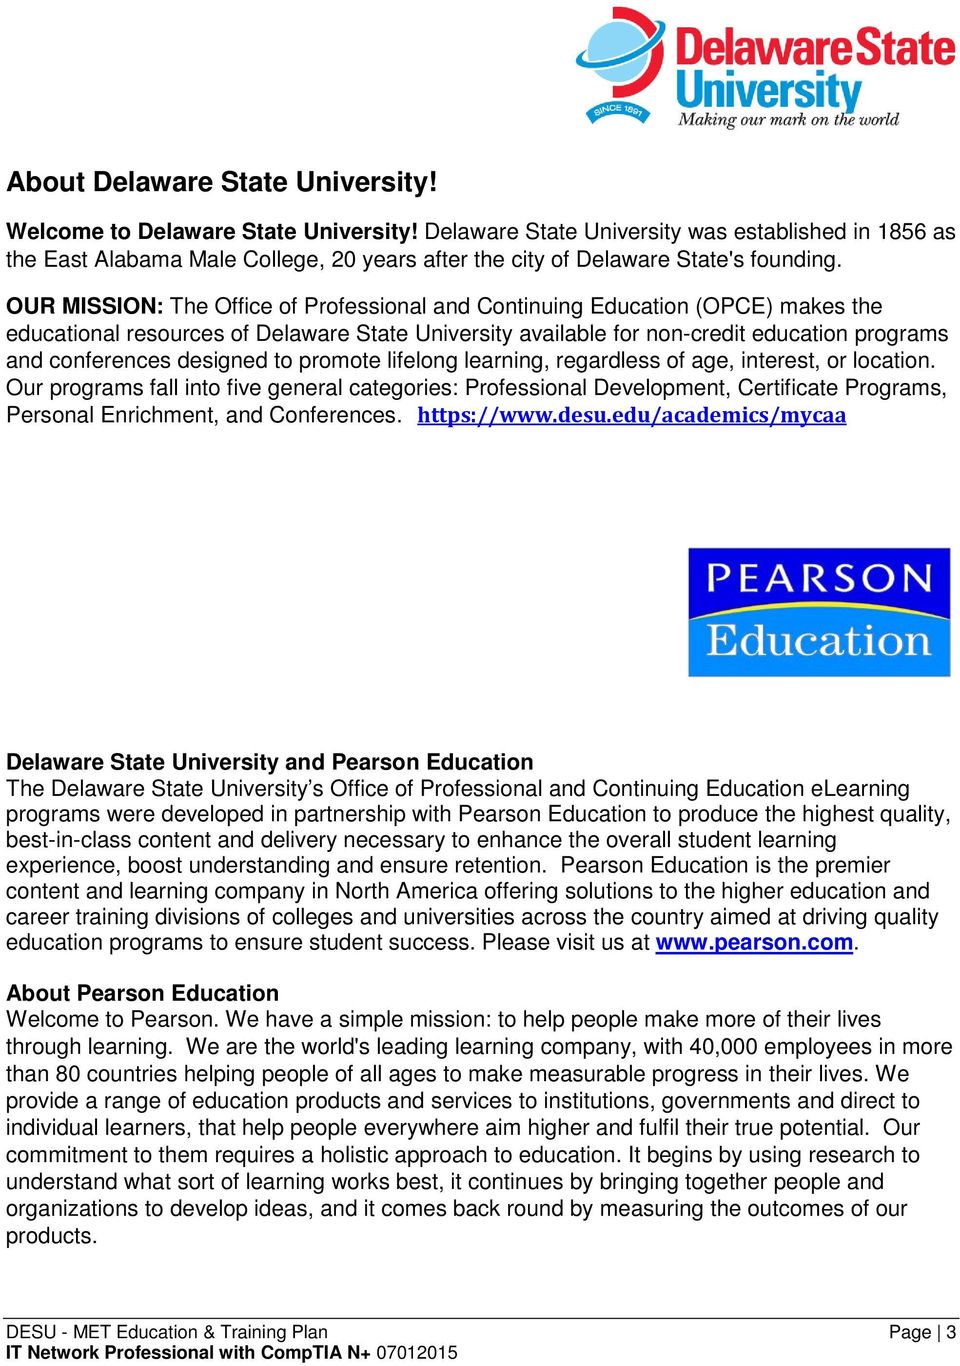 OUR MISSION: The Office of Professional and Continuing Education (OPCE) makes the educational resources of Delaware State University available for non-credit education programs and conferences